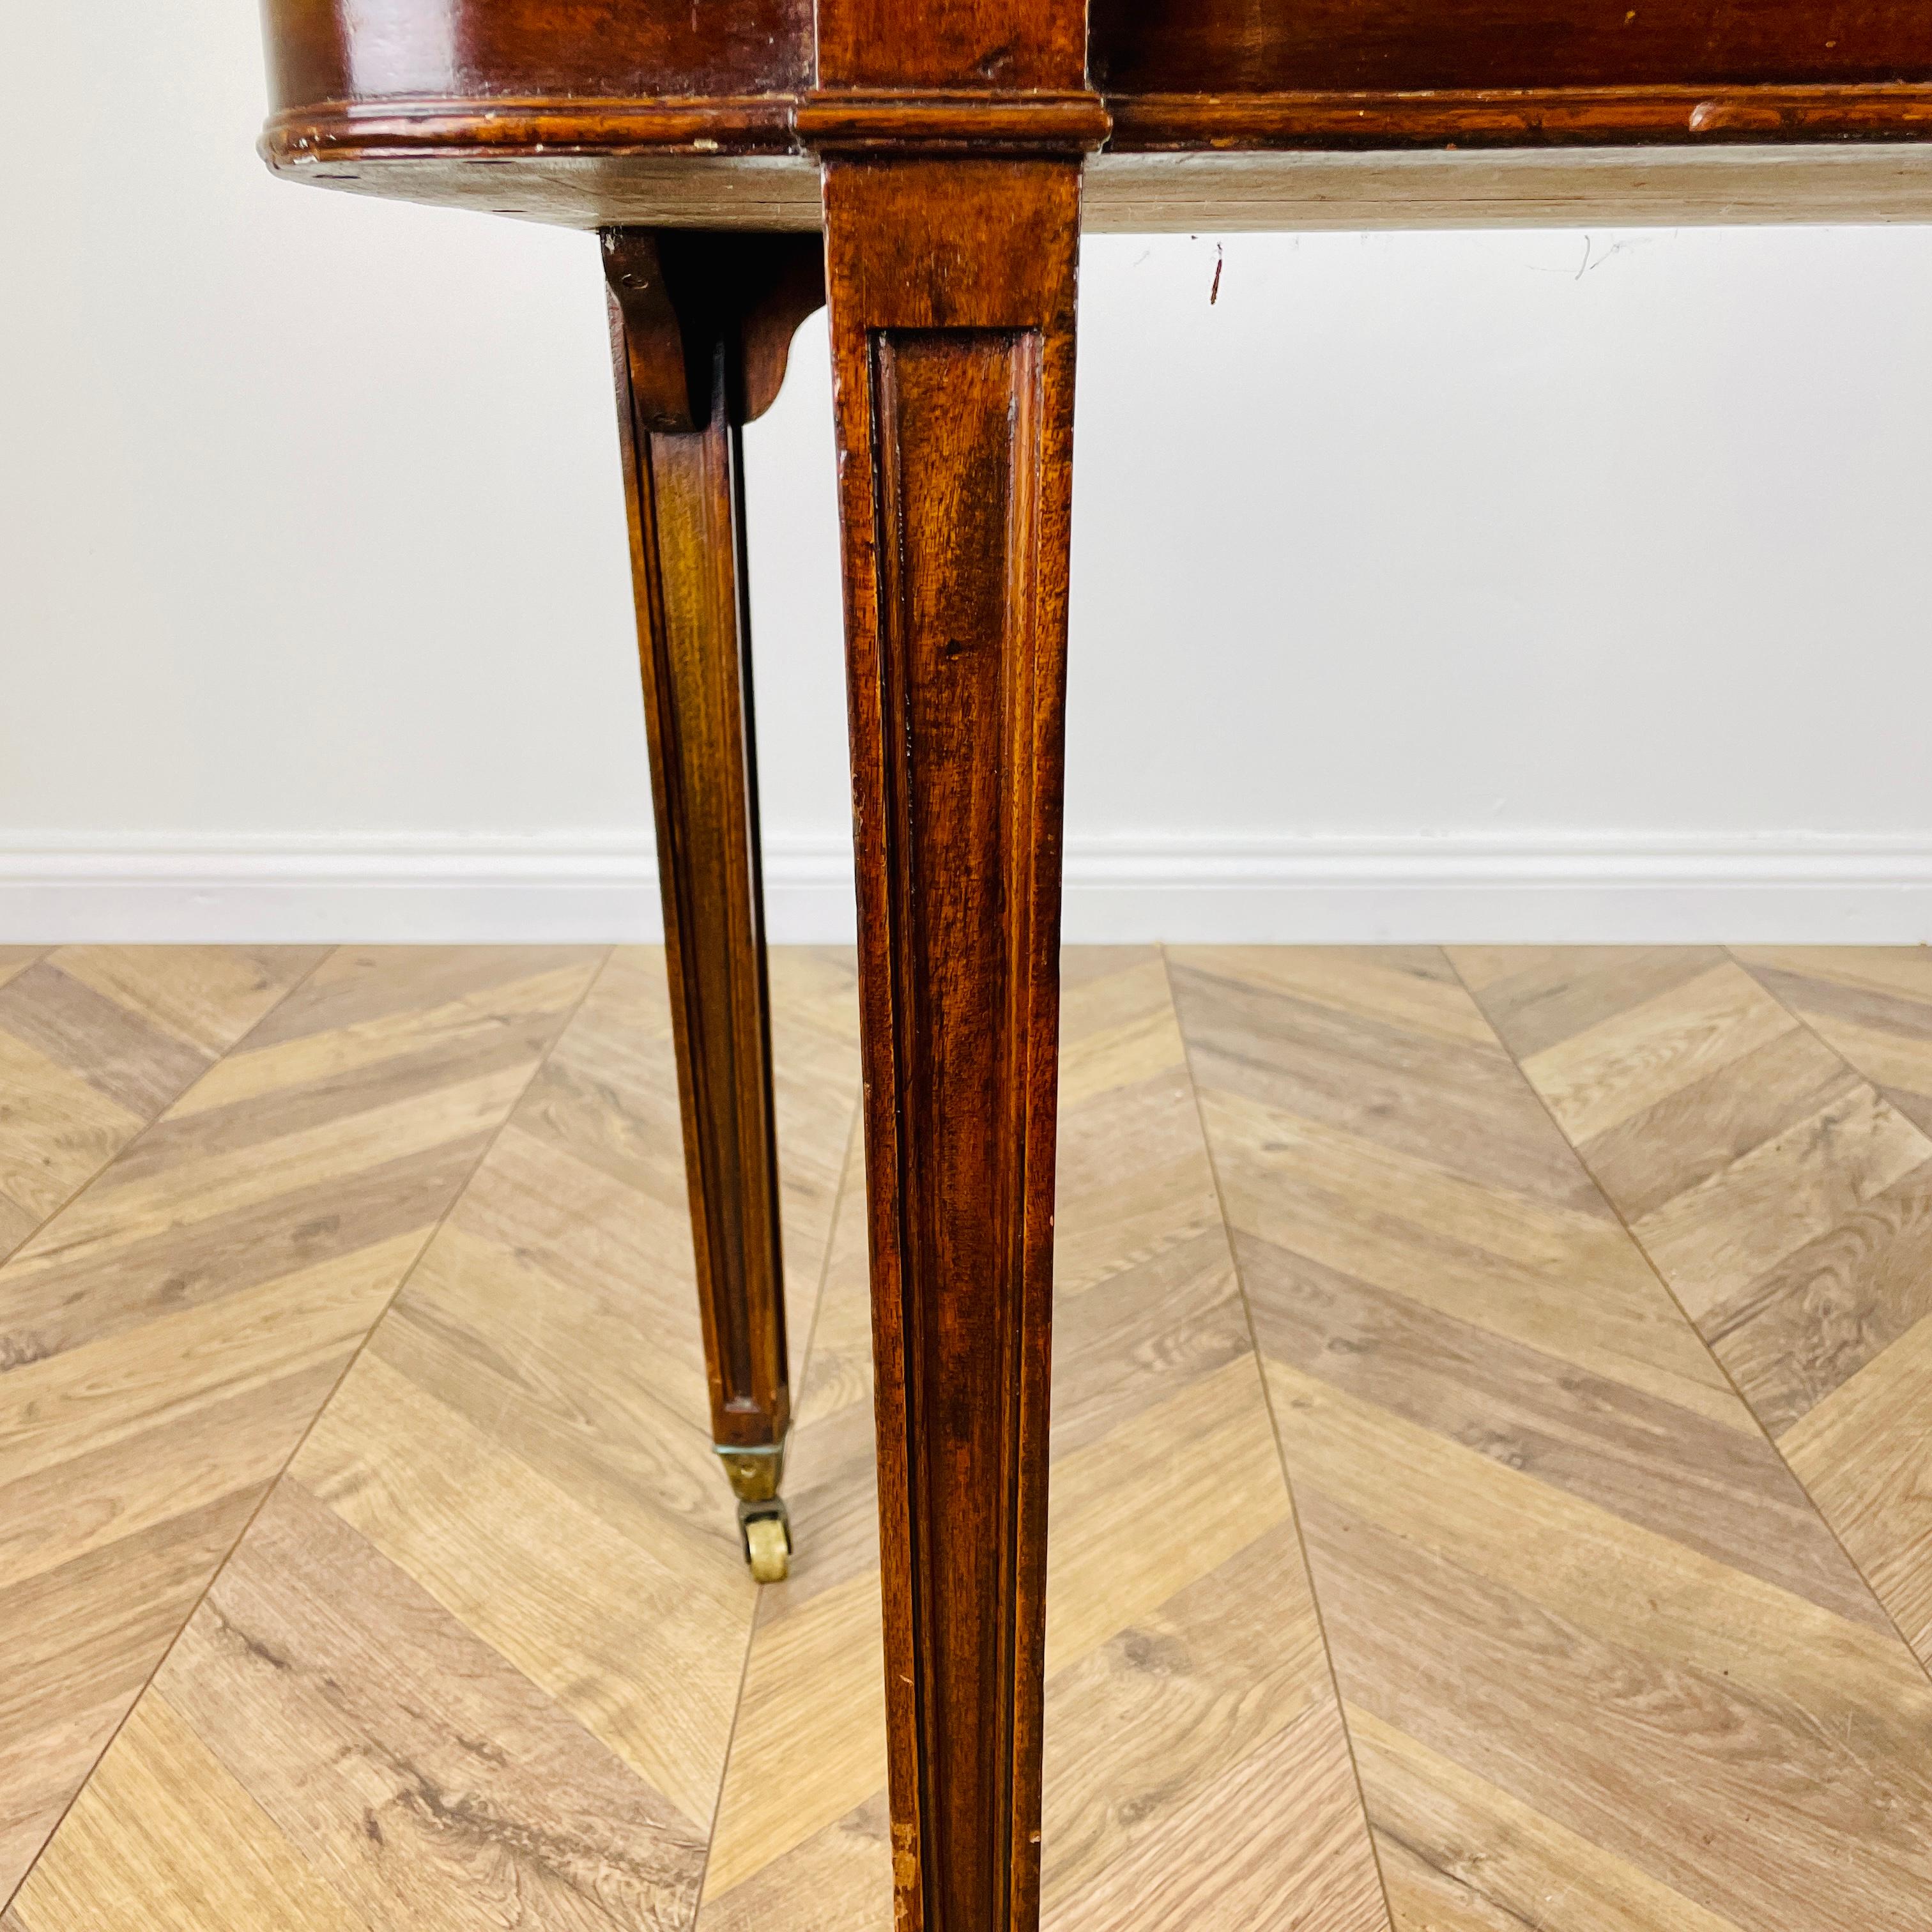 Antique English Side Table with Lift Lid Storage by Elkington + Co, 19th Century For Sale 8